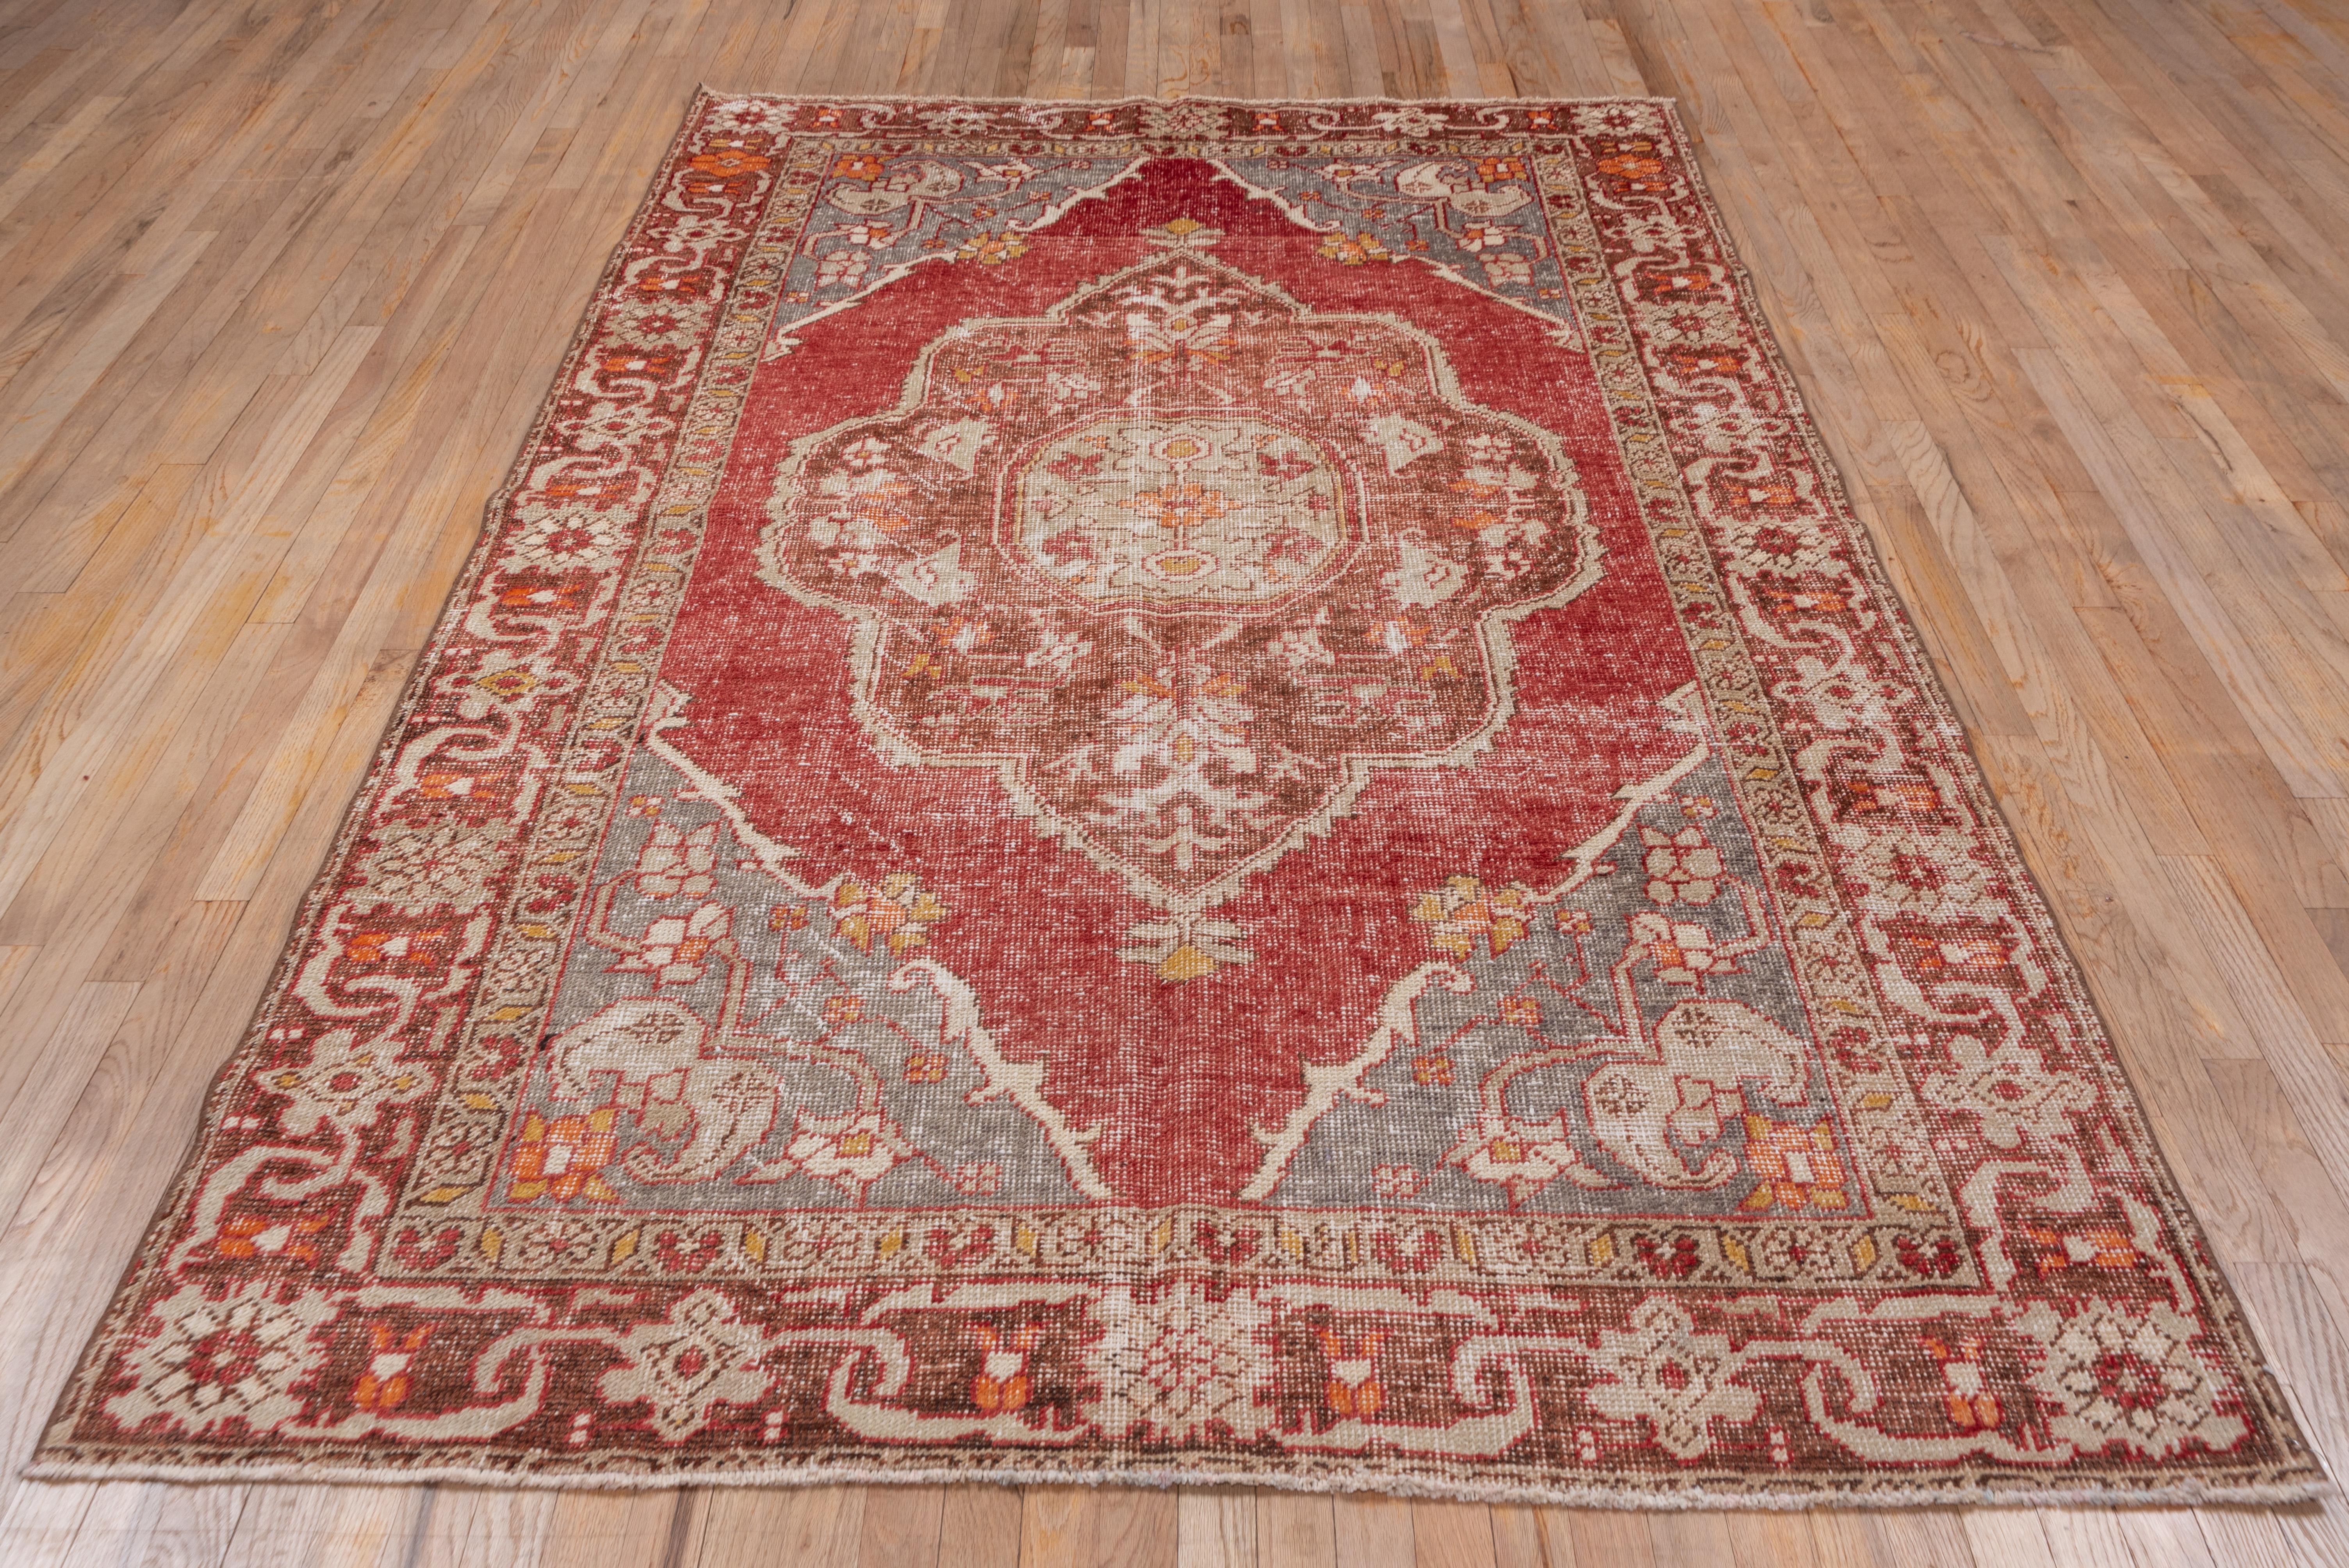 Early 20th Century Antique Turkish Oushak Rug, Red, Gray and Brown Field, Even Wear For Sale